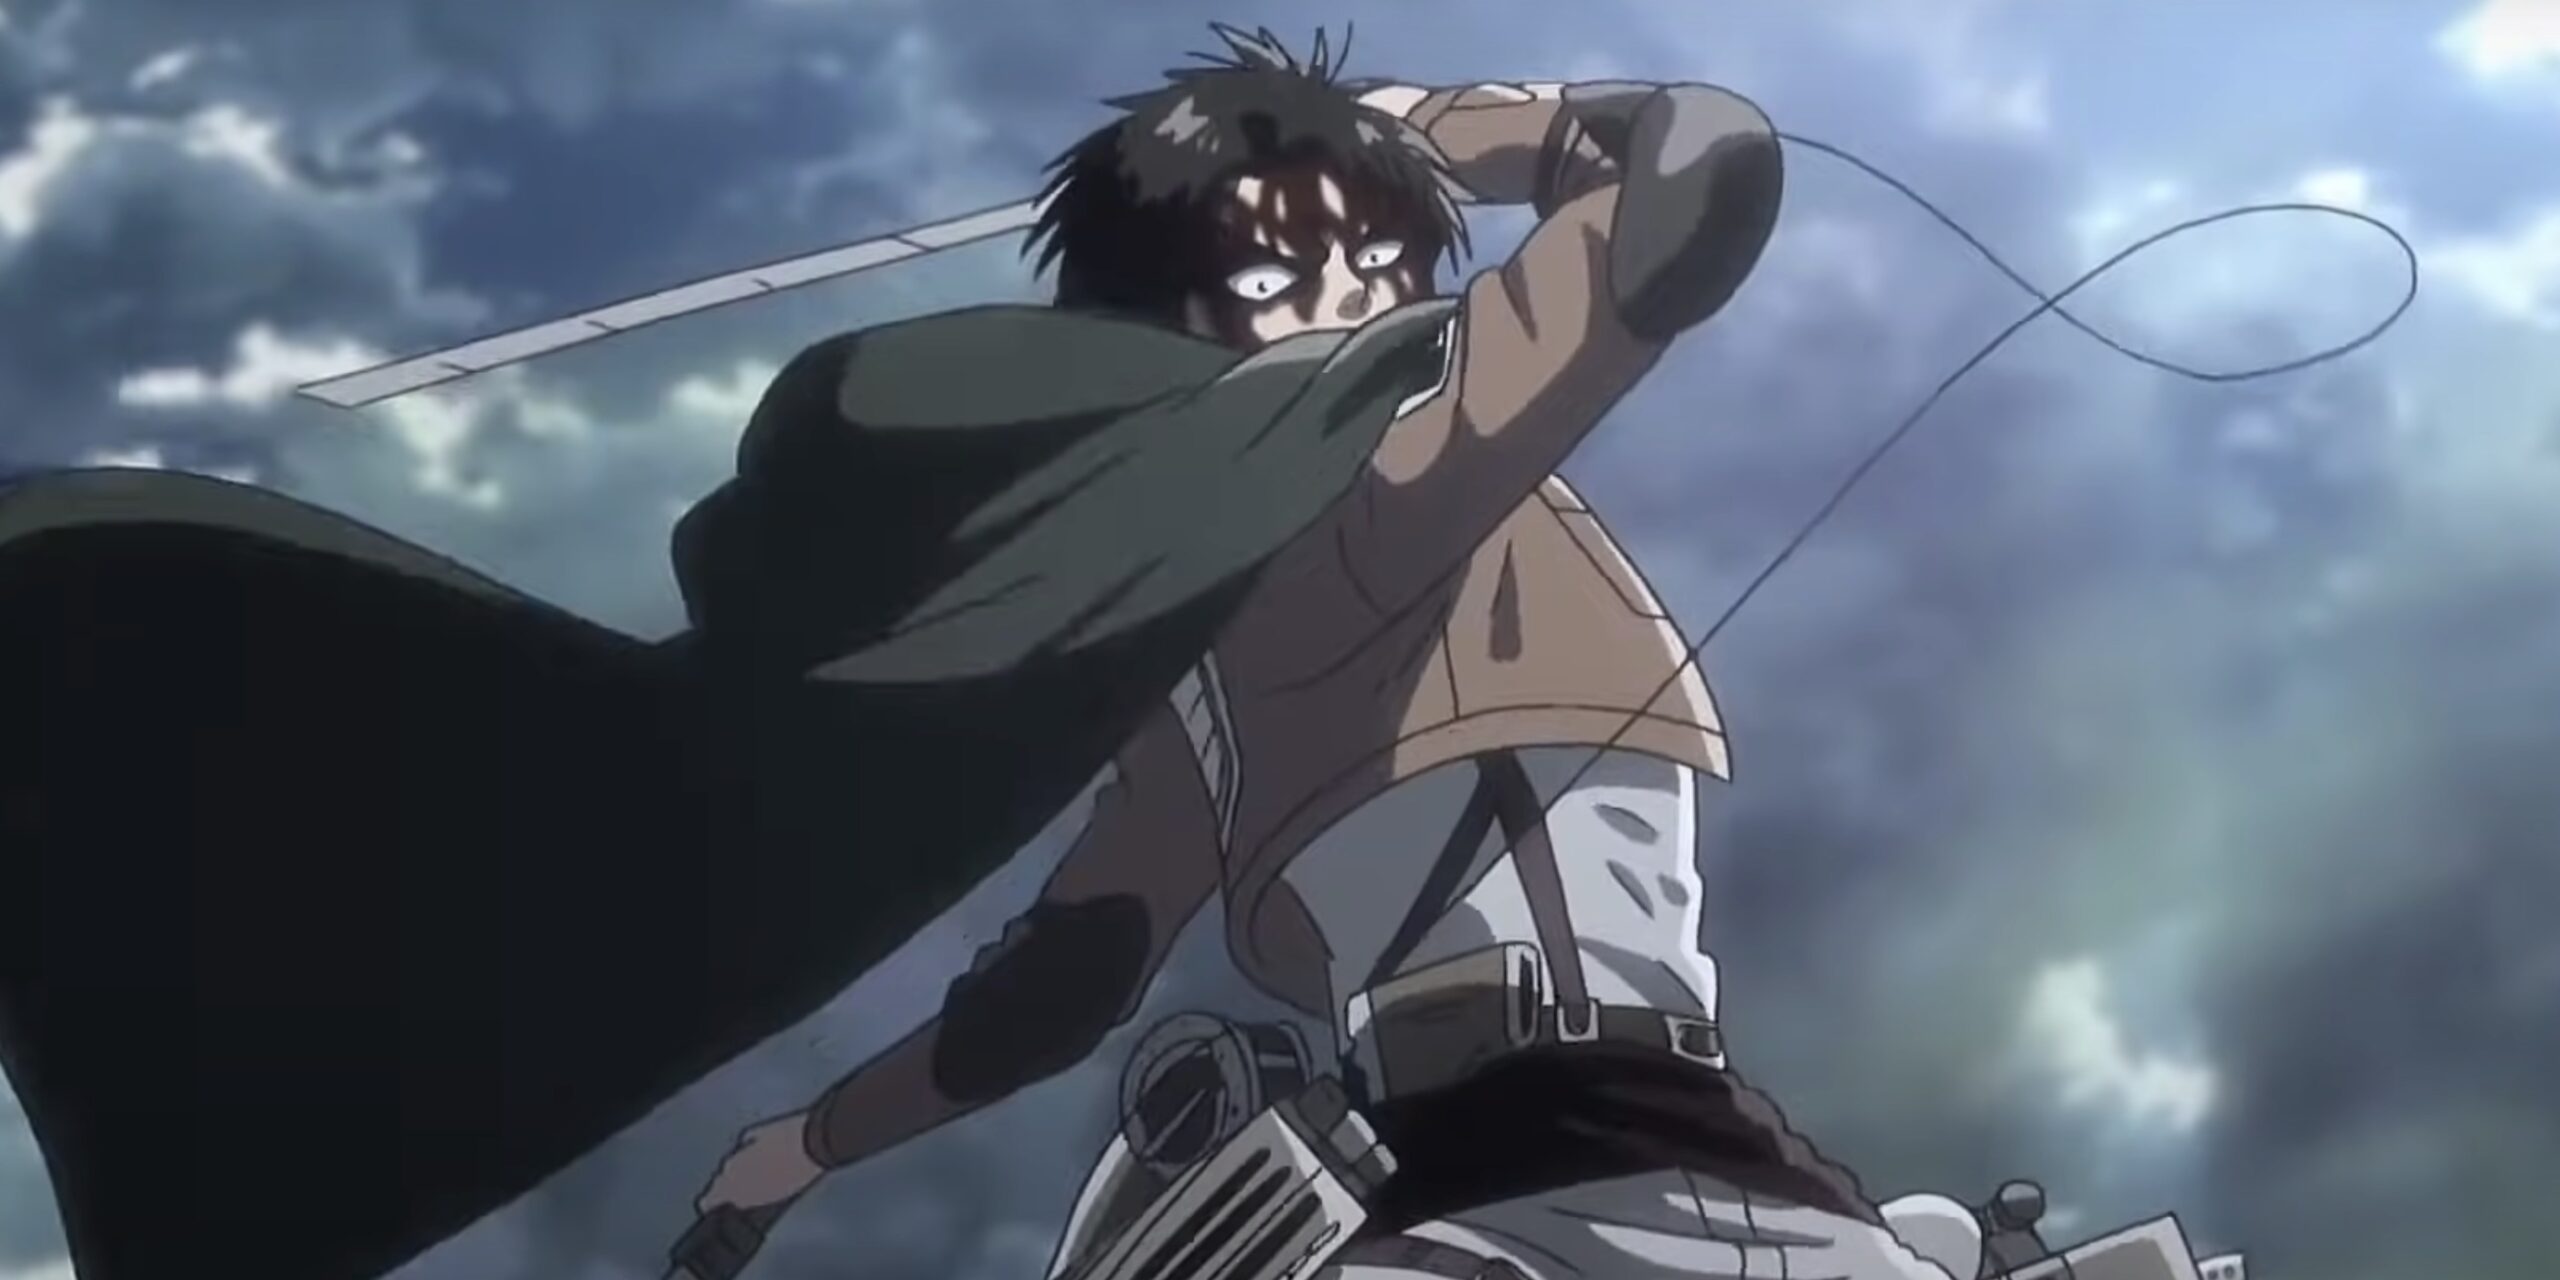 How Does ODM Gear Function In Attack on Titan?